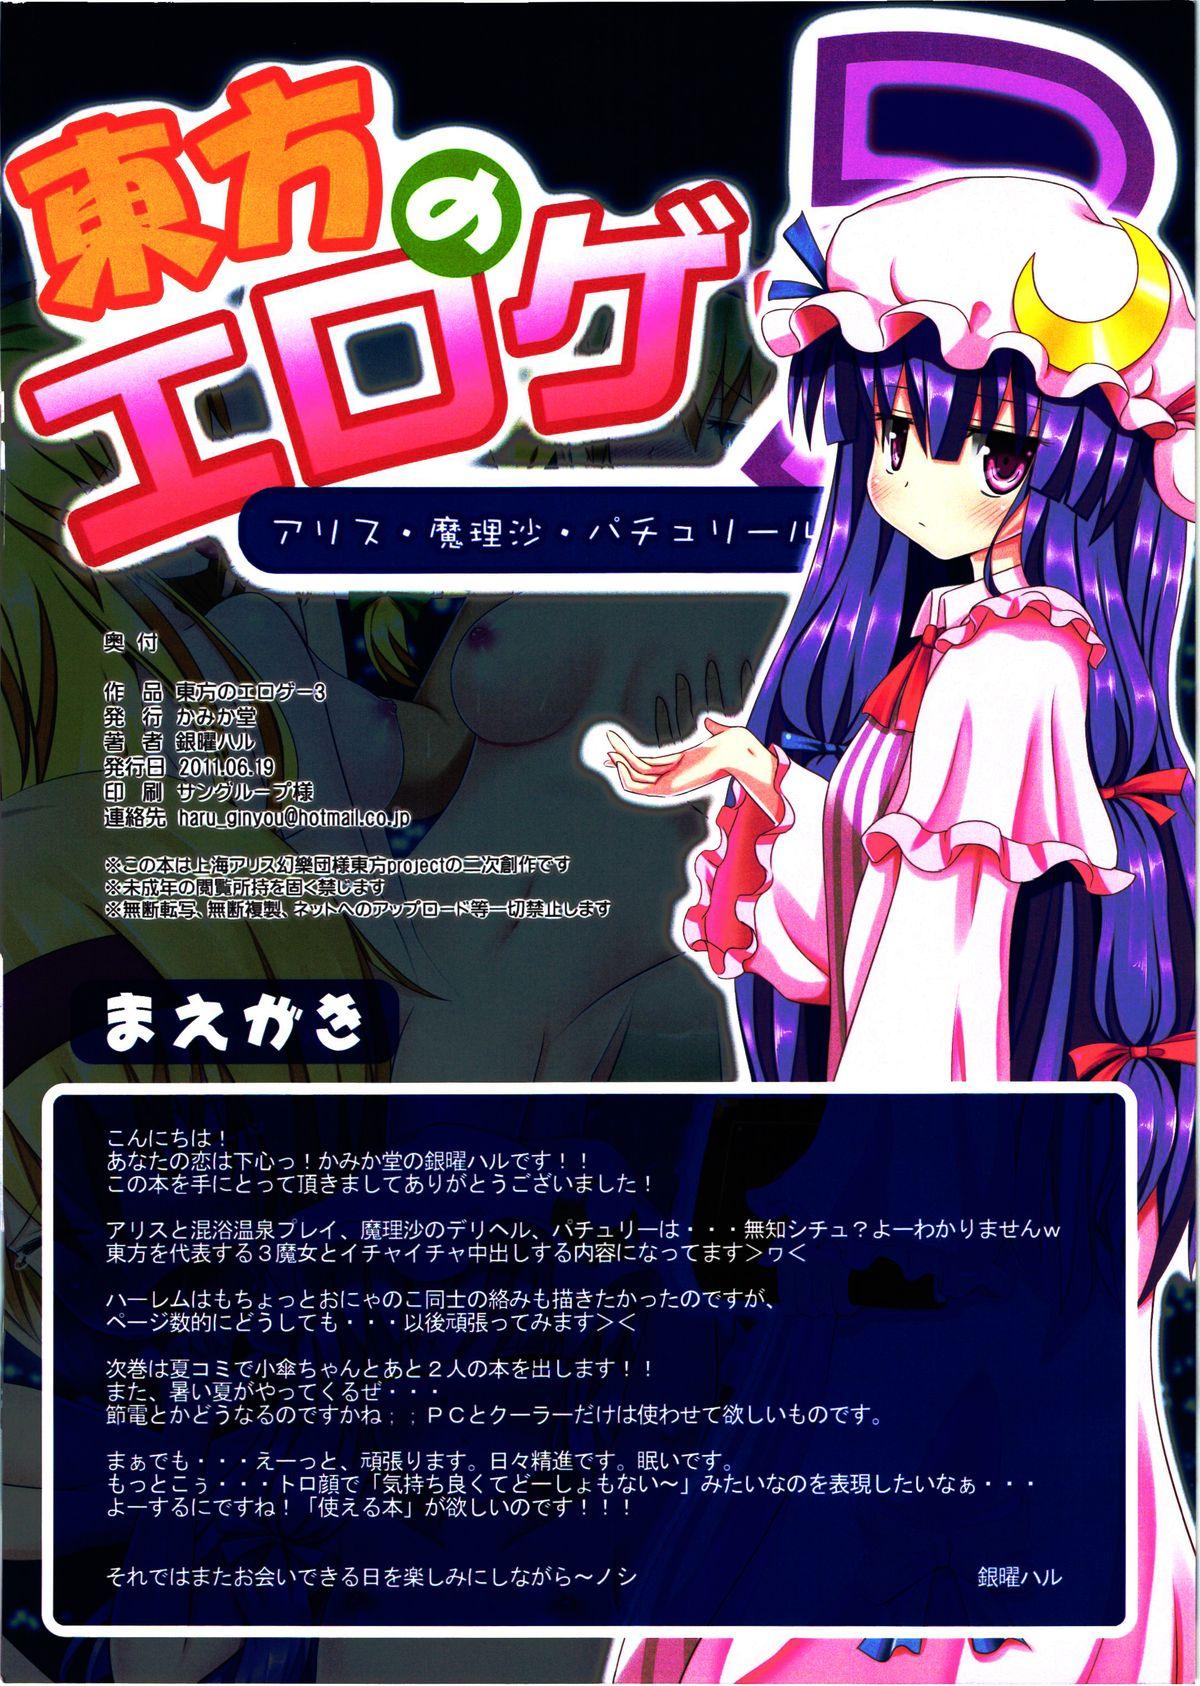 Doggy Style Porn Touhou no Eroge 3 – Touhou project Highschool - Chapter 2